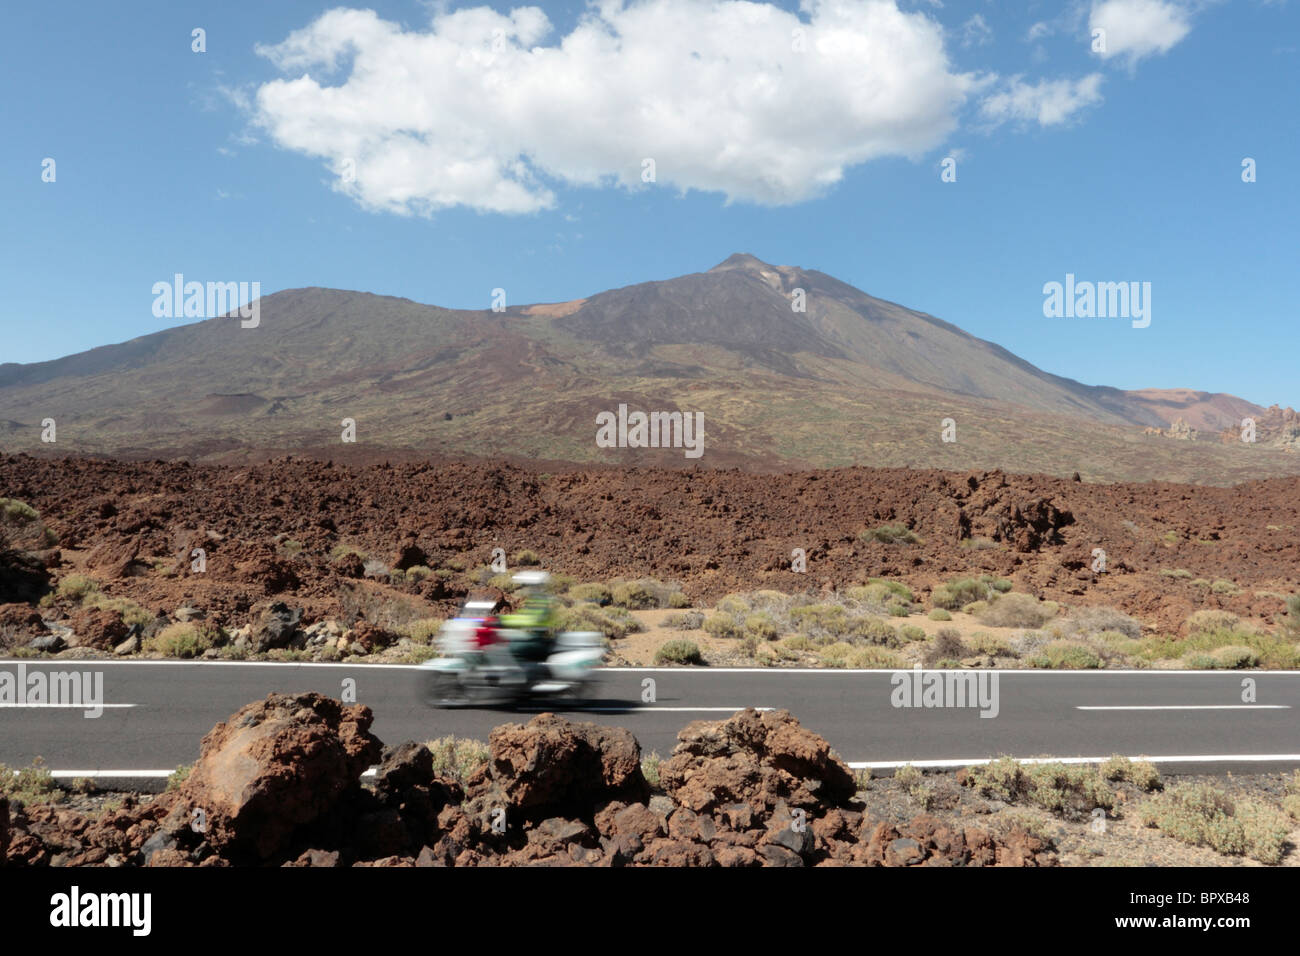 A Guardia Civil Trafico motorcyclist zooms past Teide in the Las Canadas del Teide National Park in Tenerife Canary Islands Stock Photo